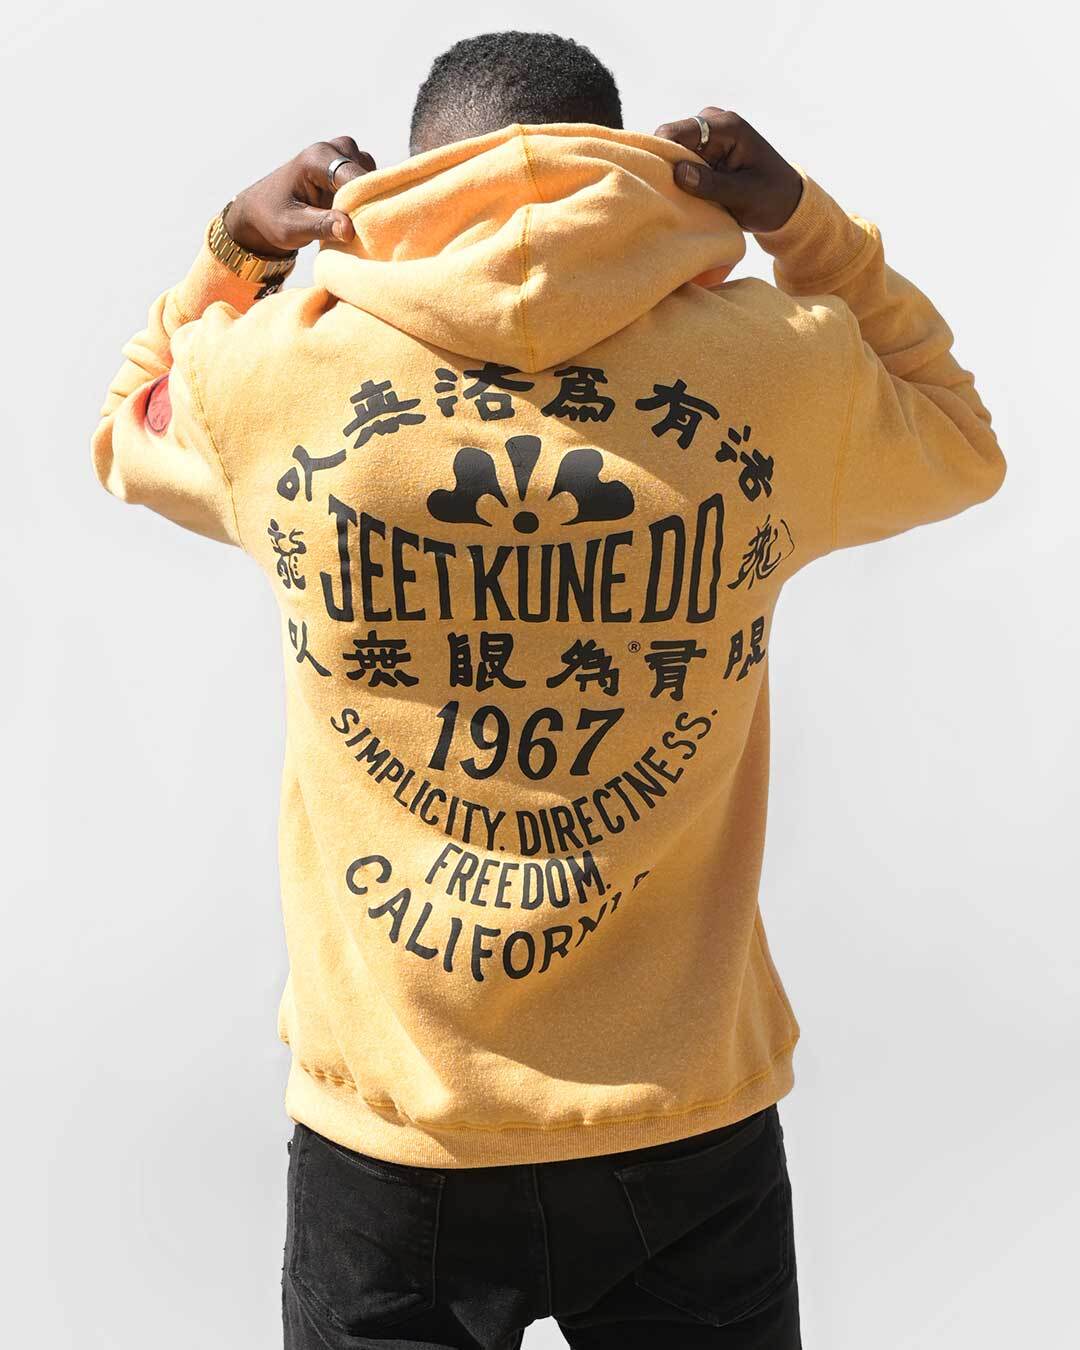 Bruce Lee JKD 1967 Yellow PO Hoody - Roots of Fight